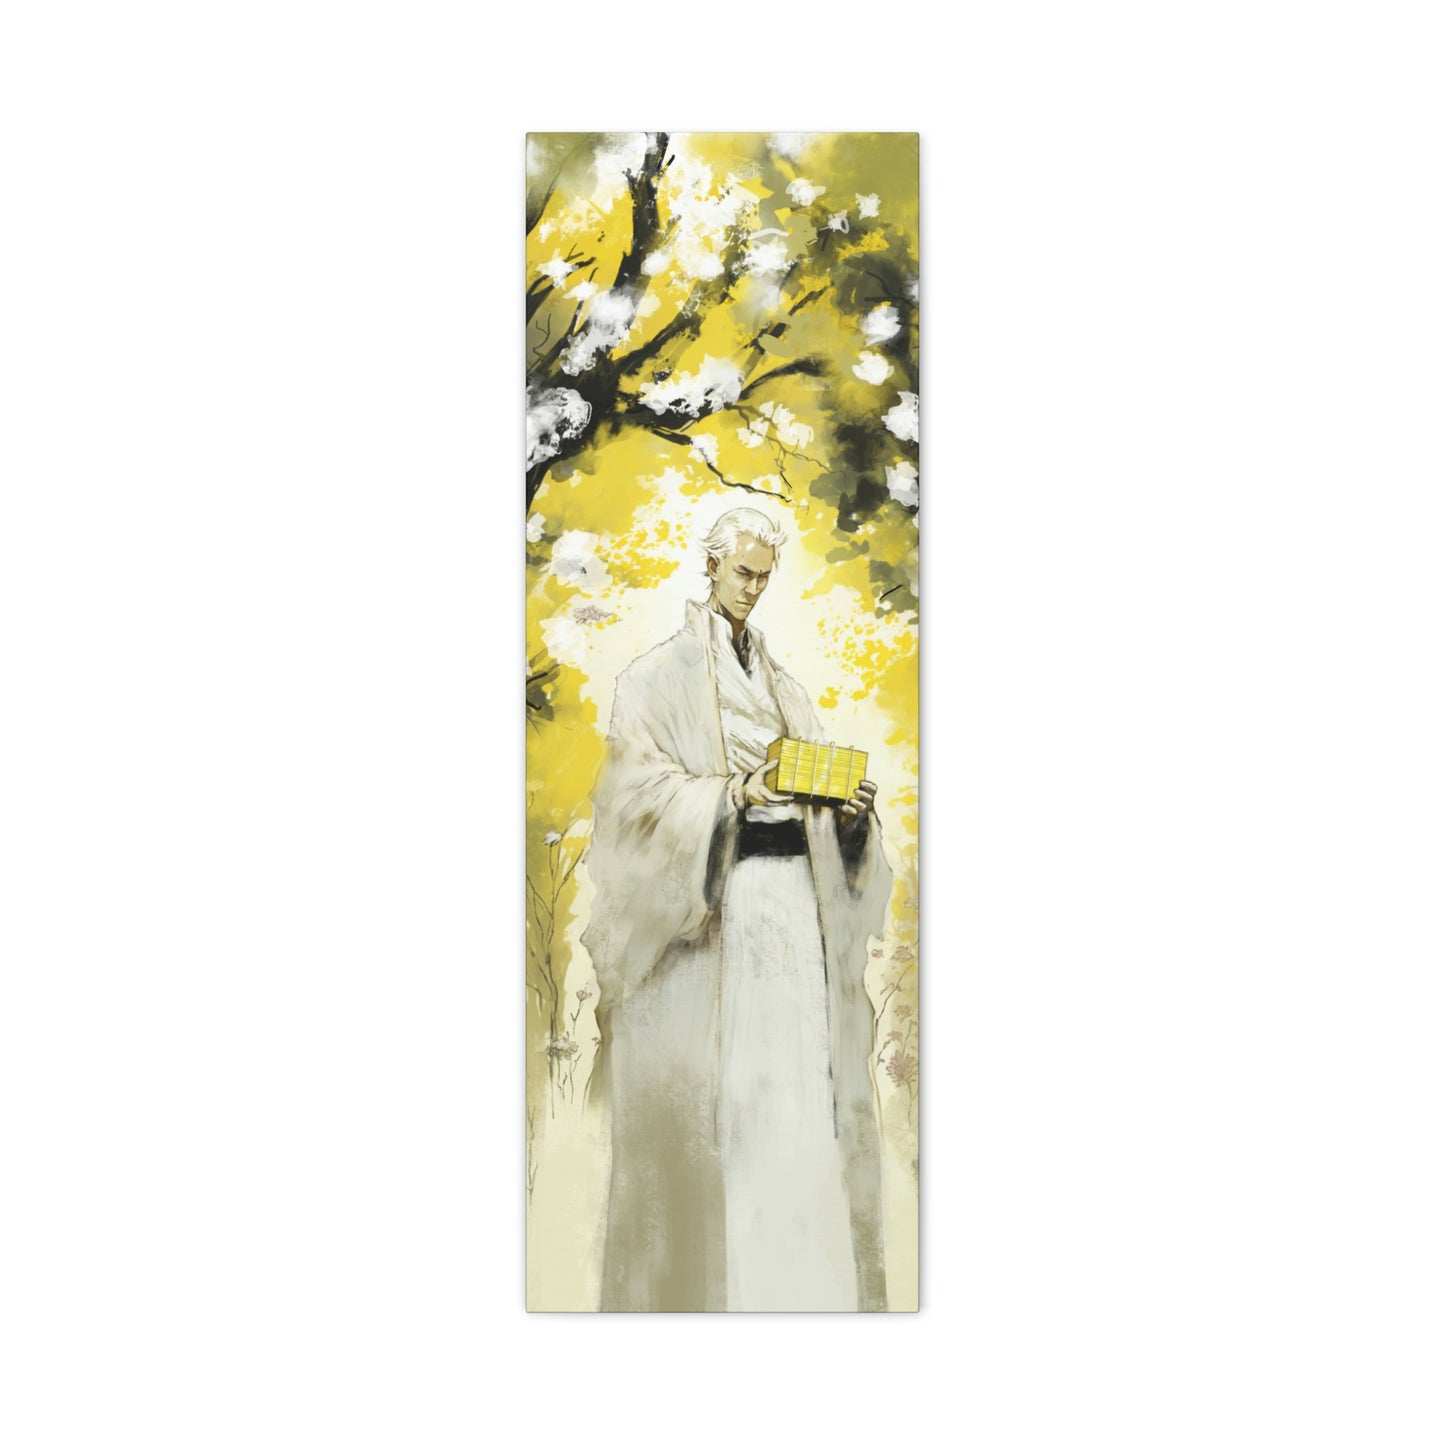 Art of the Restoration - Moroni Delivers the Plates - Canvas Gallery Wrap Print